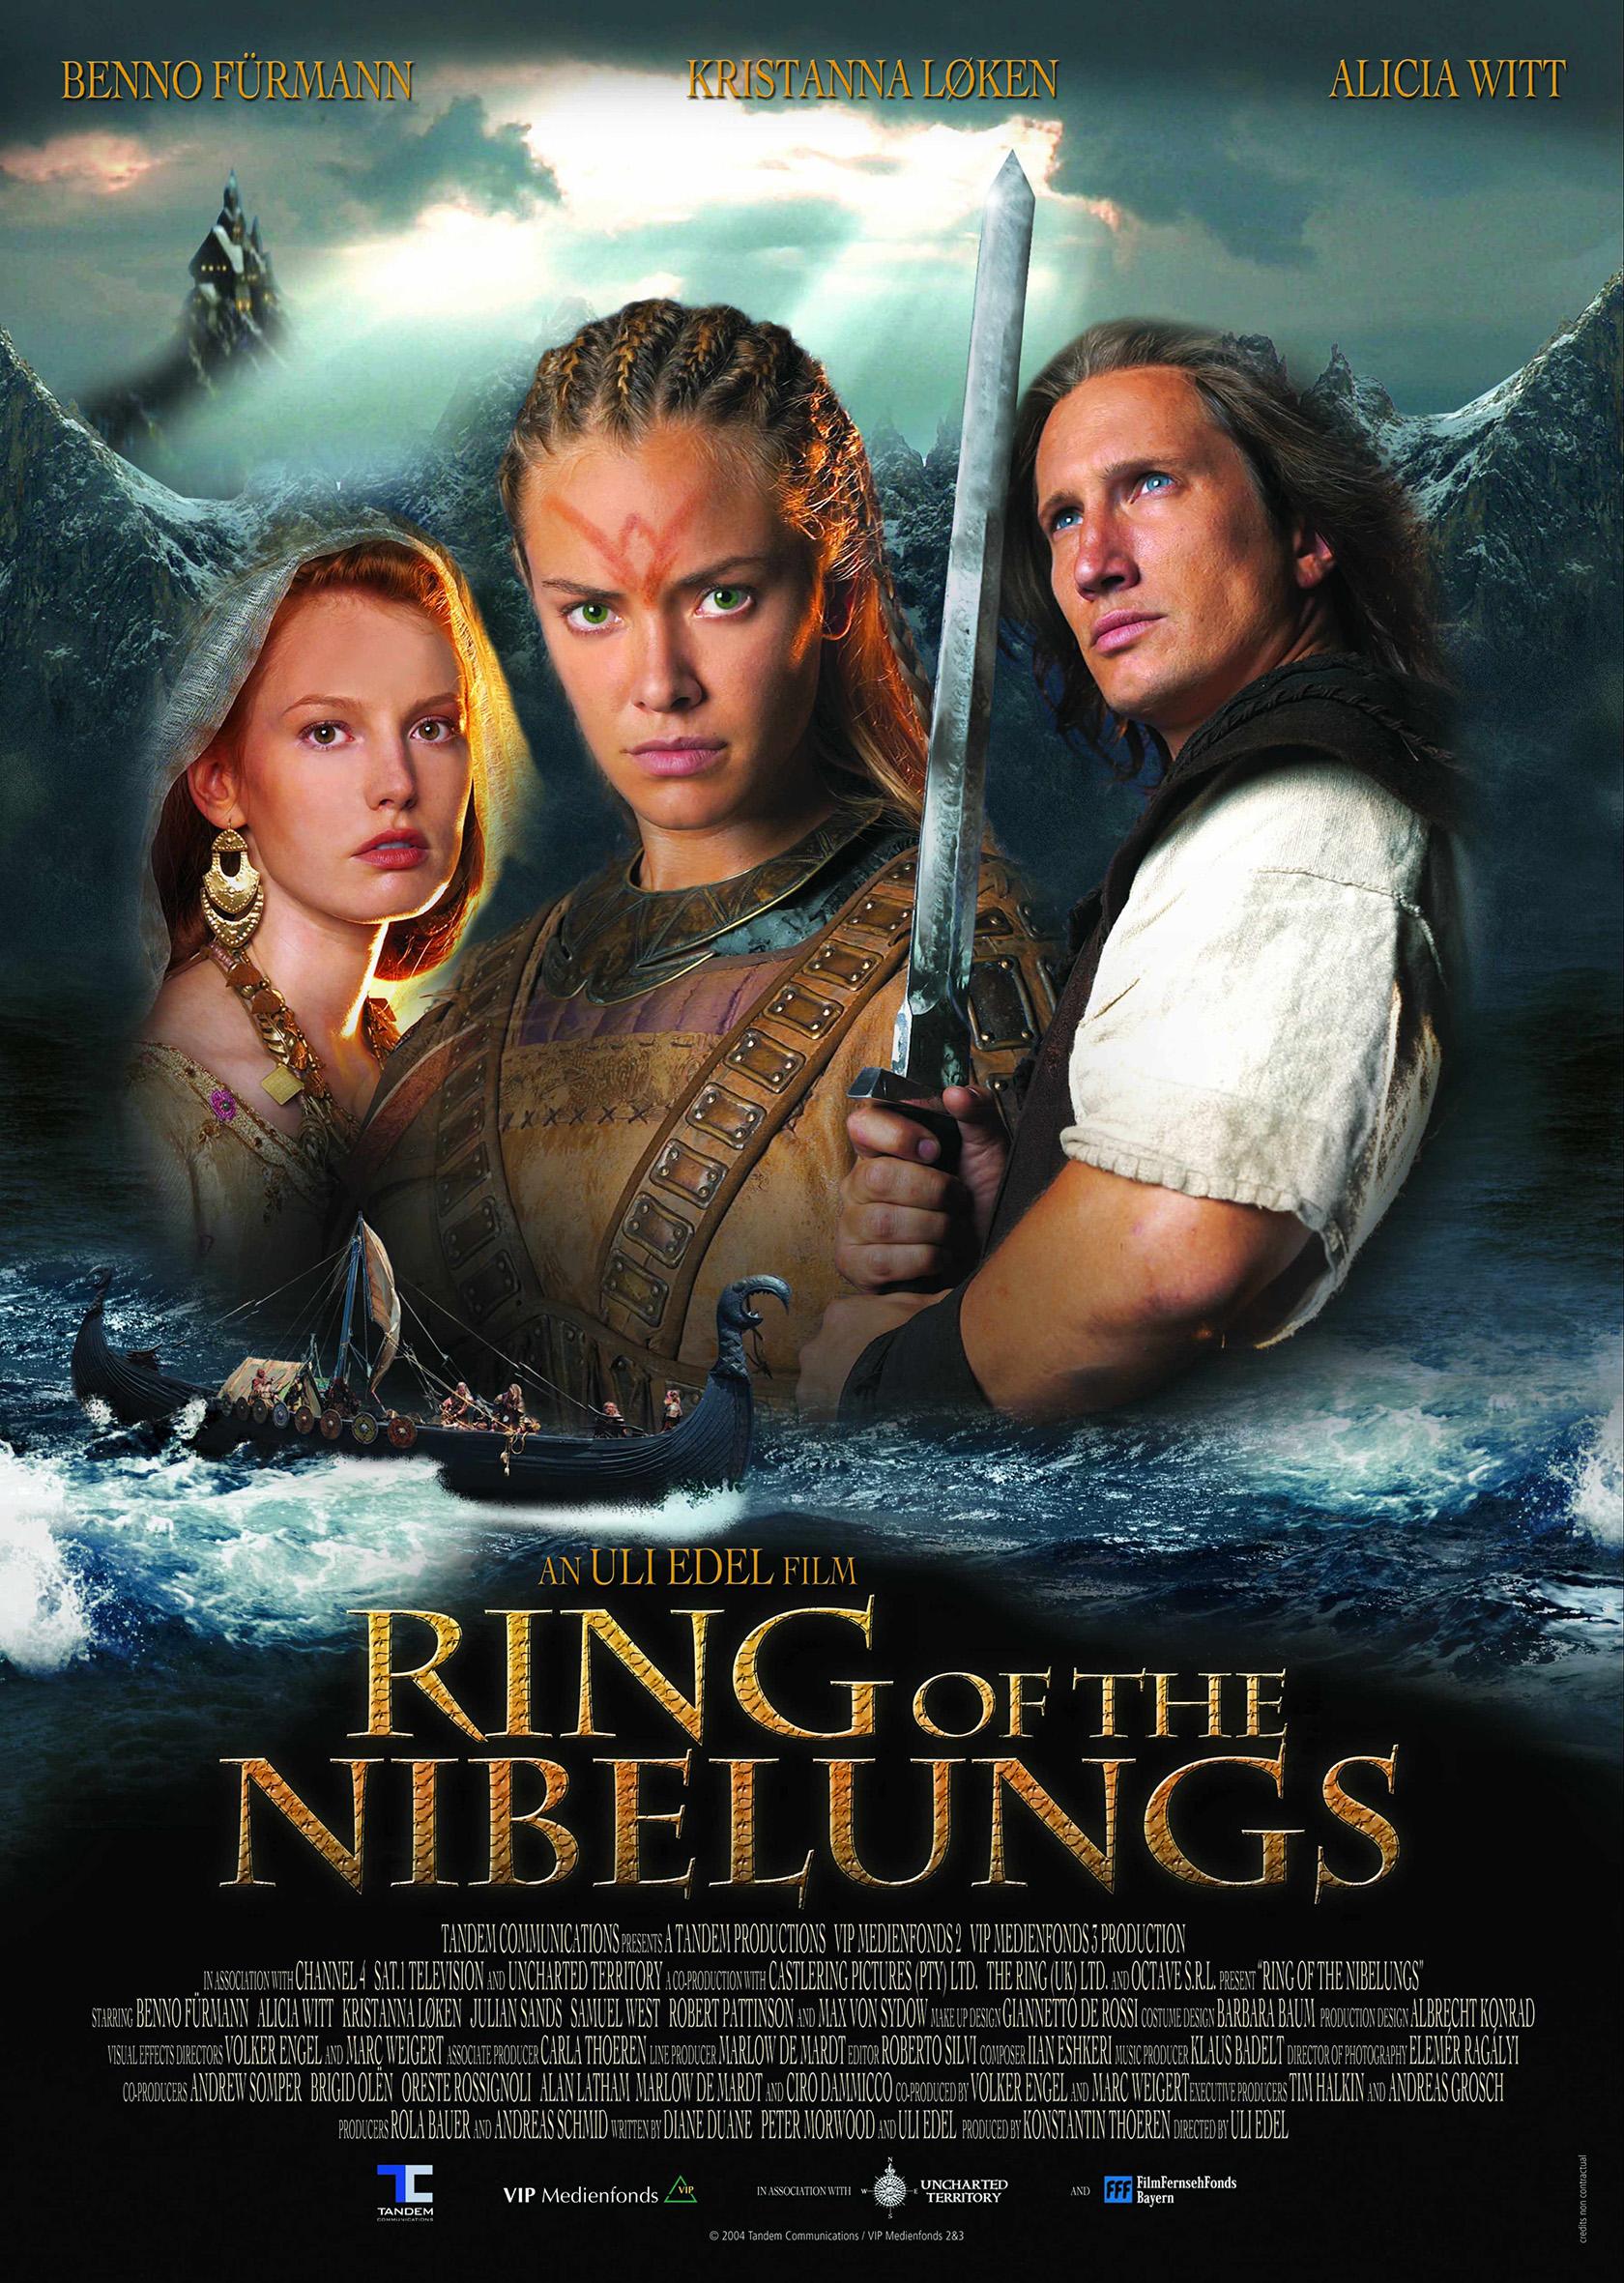 The Ring of the Nibelungs